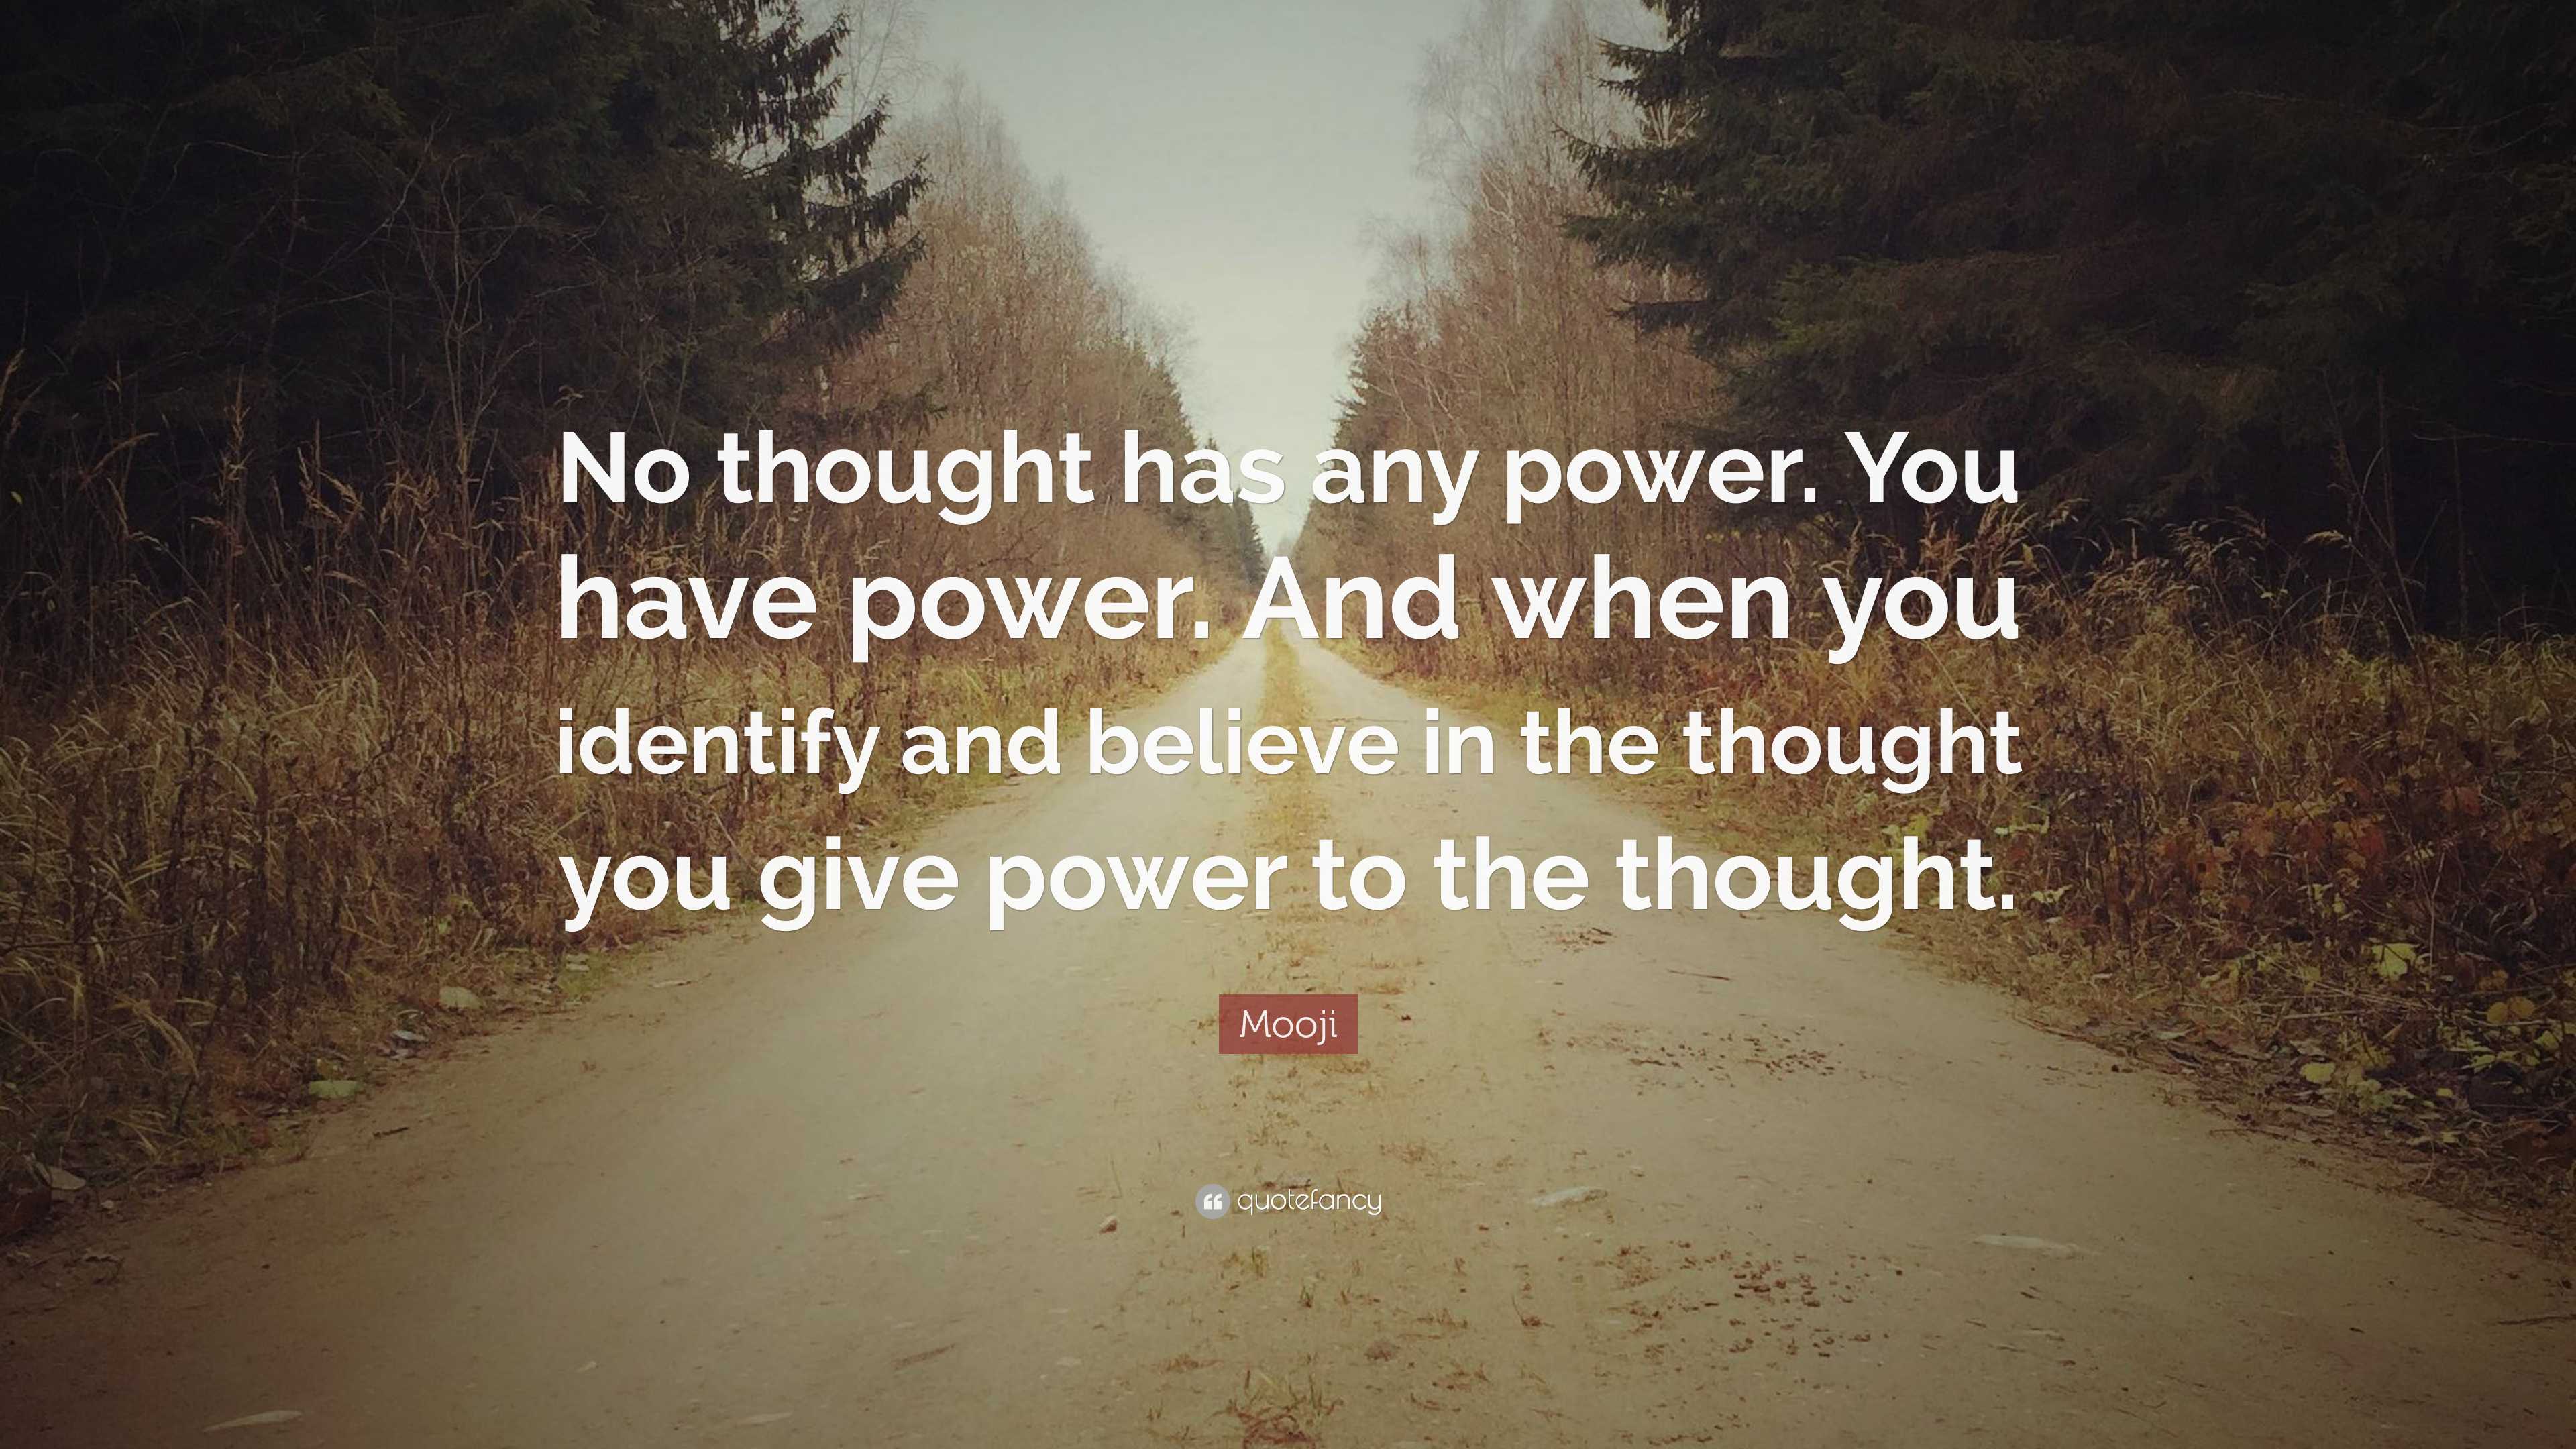 Mooji Quote: “No thought has any power. You have power. And when you ...